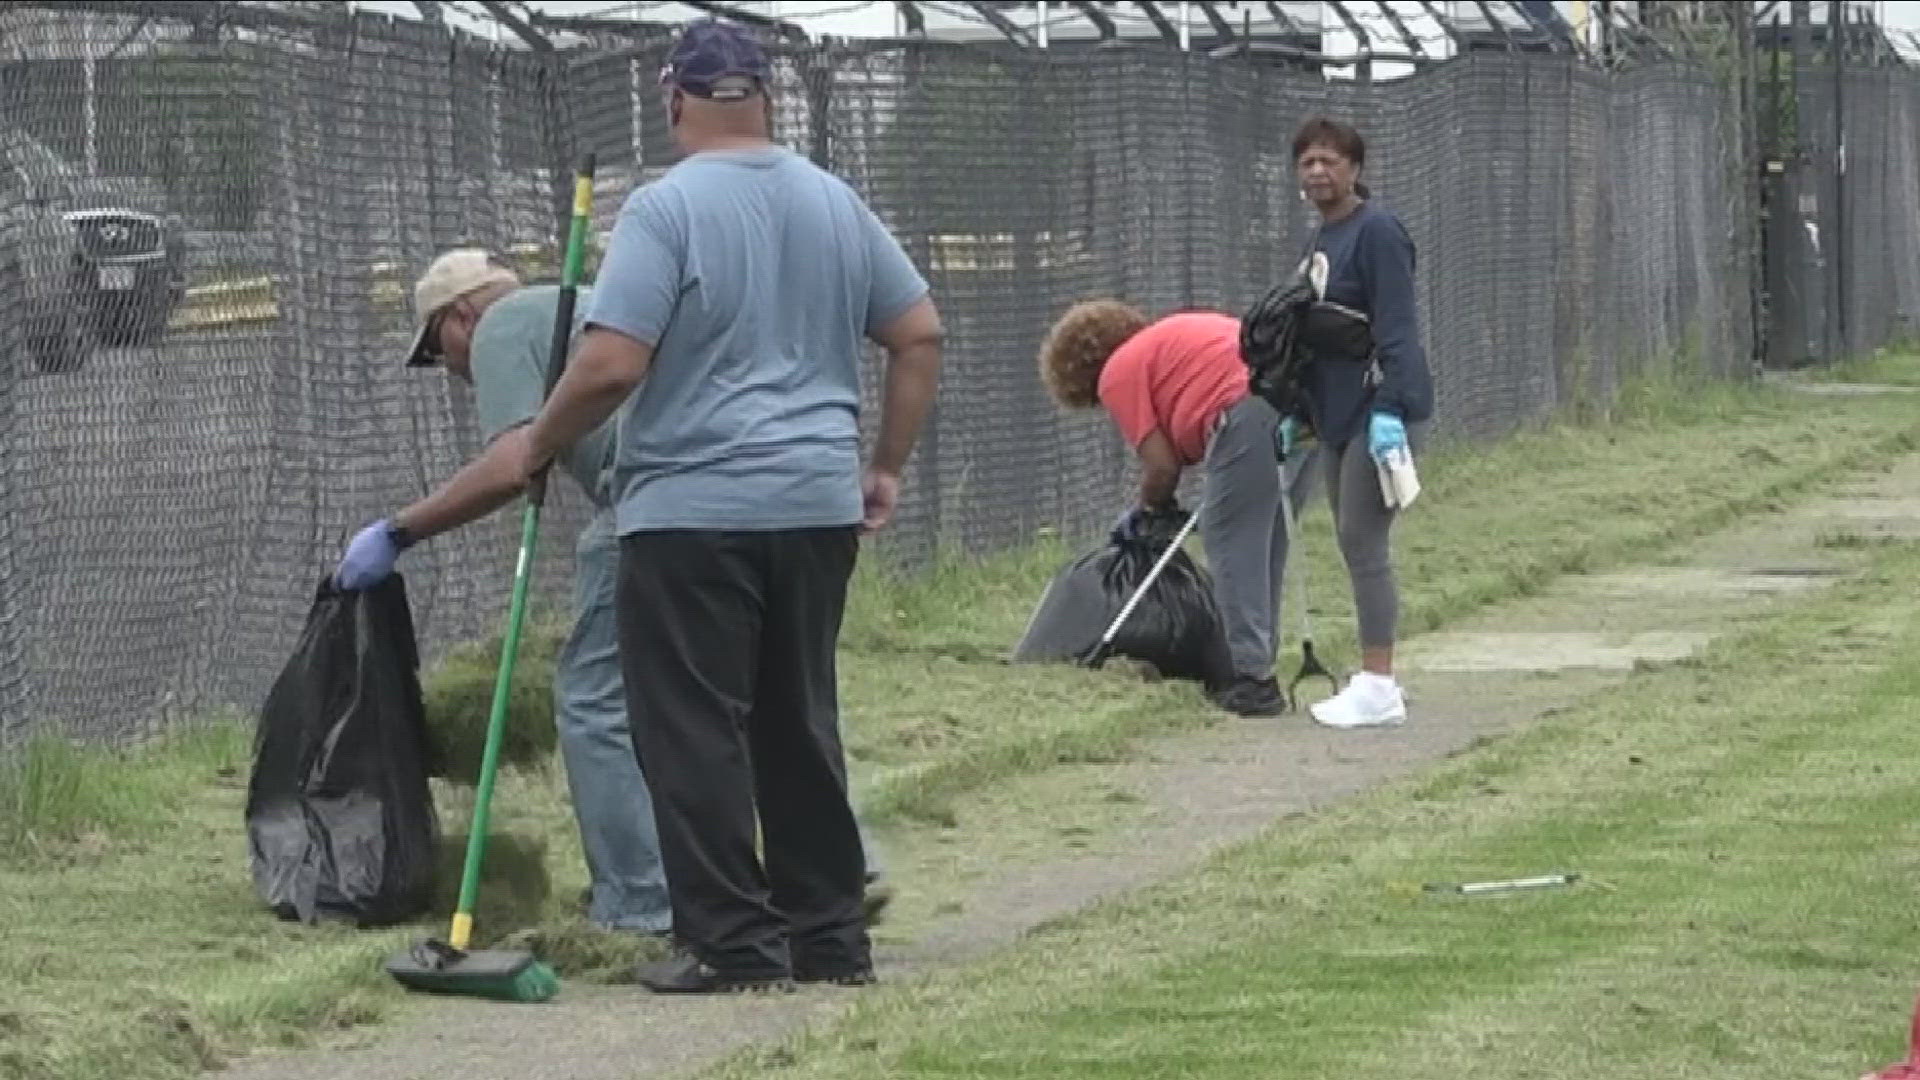 The event was part of something called the Great American Cleanup, an annual initiative that focuses on beautifying neighborhoods across the country.